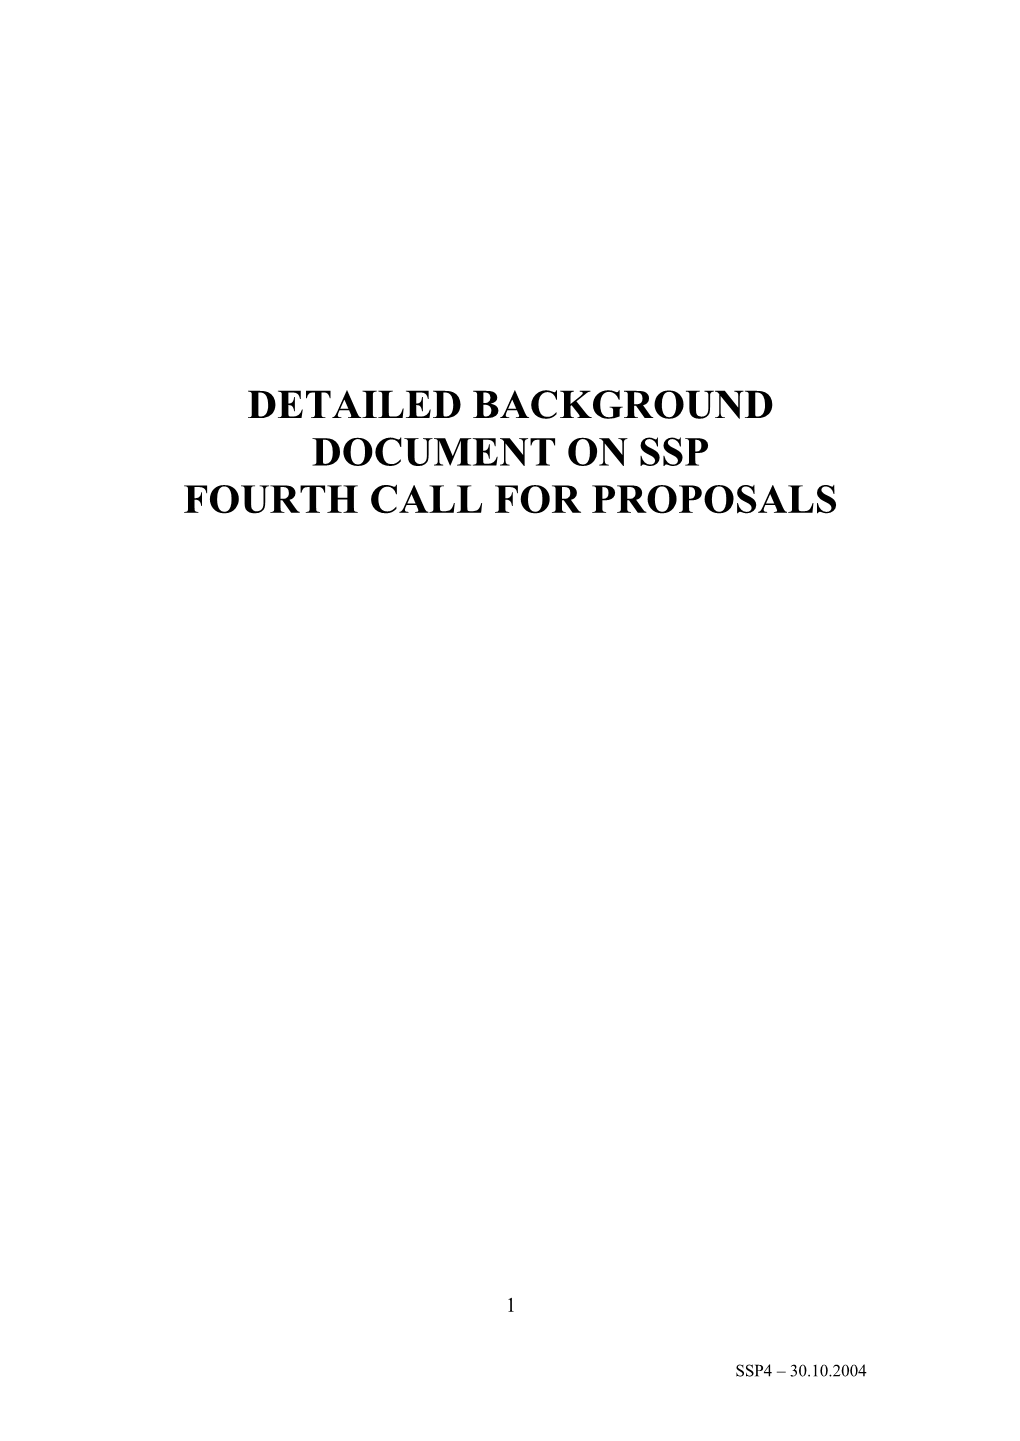 Detailed Background Document on Ssp Fourth Call for Proposals